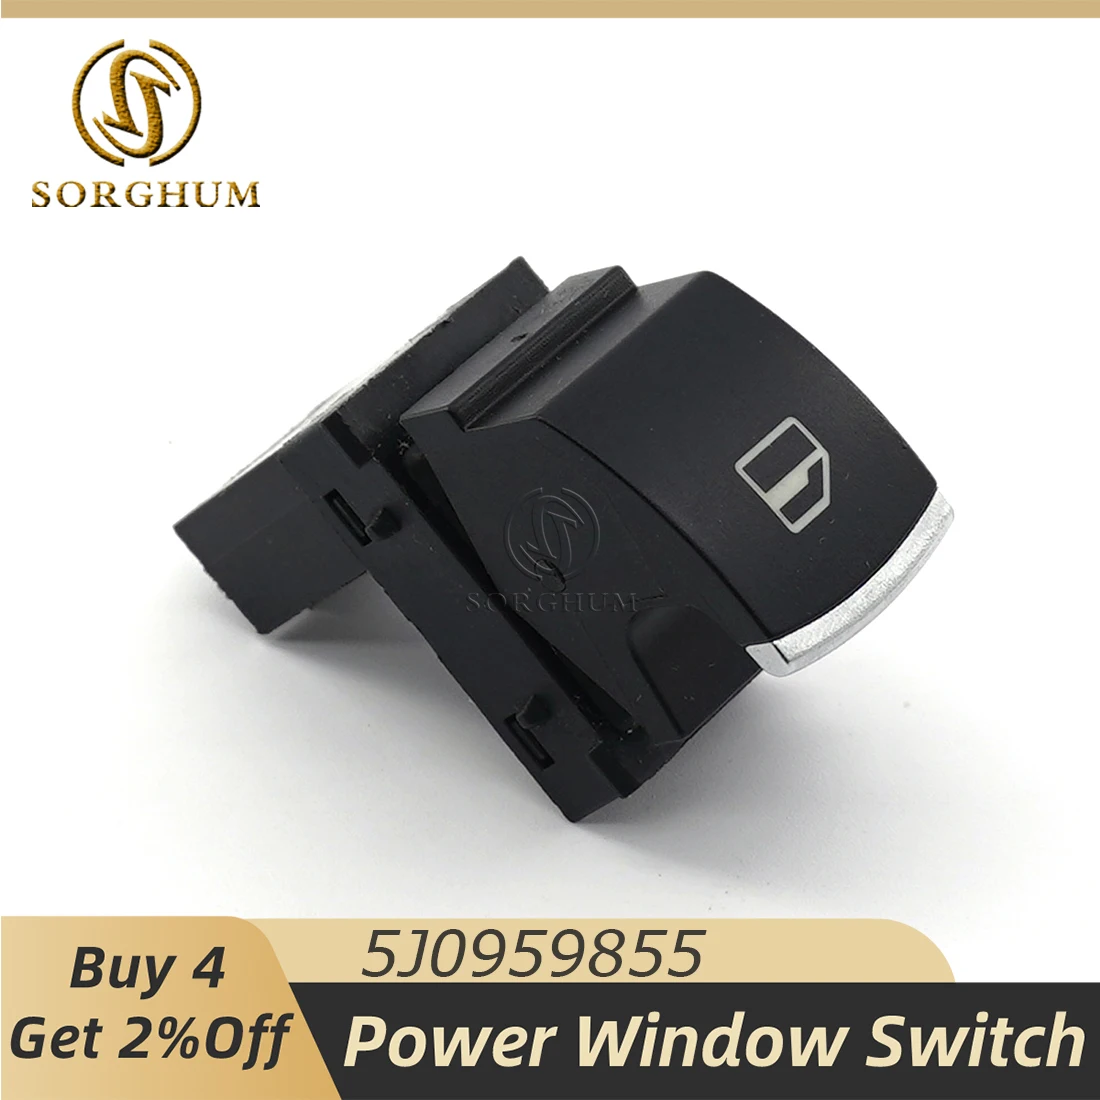 

Sorghum Electric Car Passenger Power Window Lifter Switch Button 5J0959855 For Skoda Fabia Octavia Roomster Superb 7L6959855